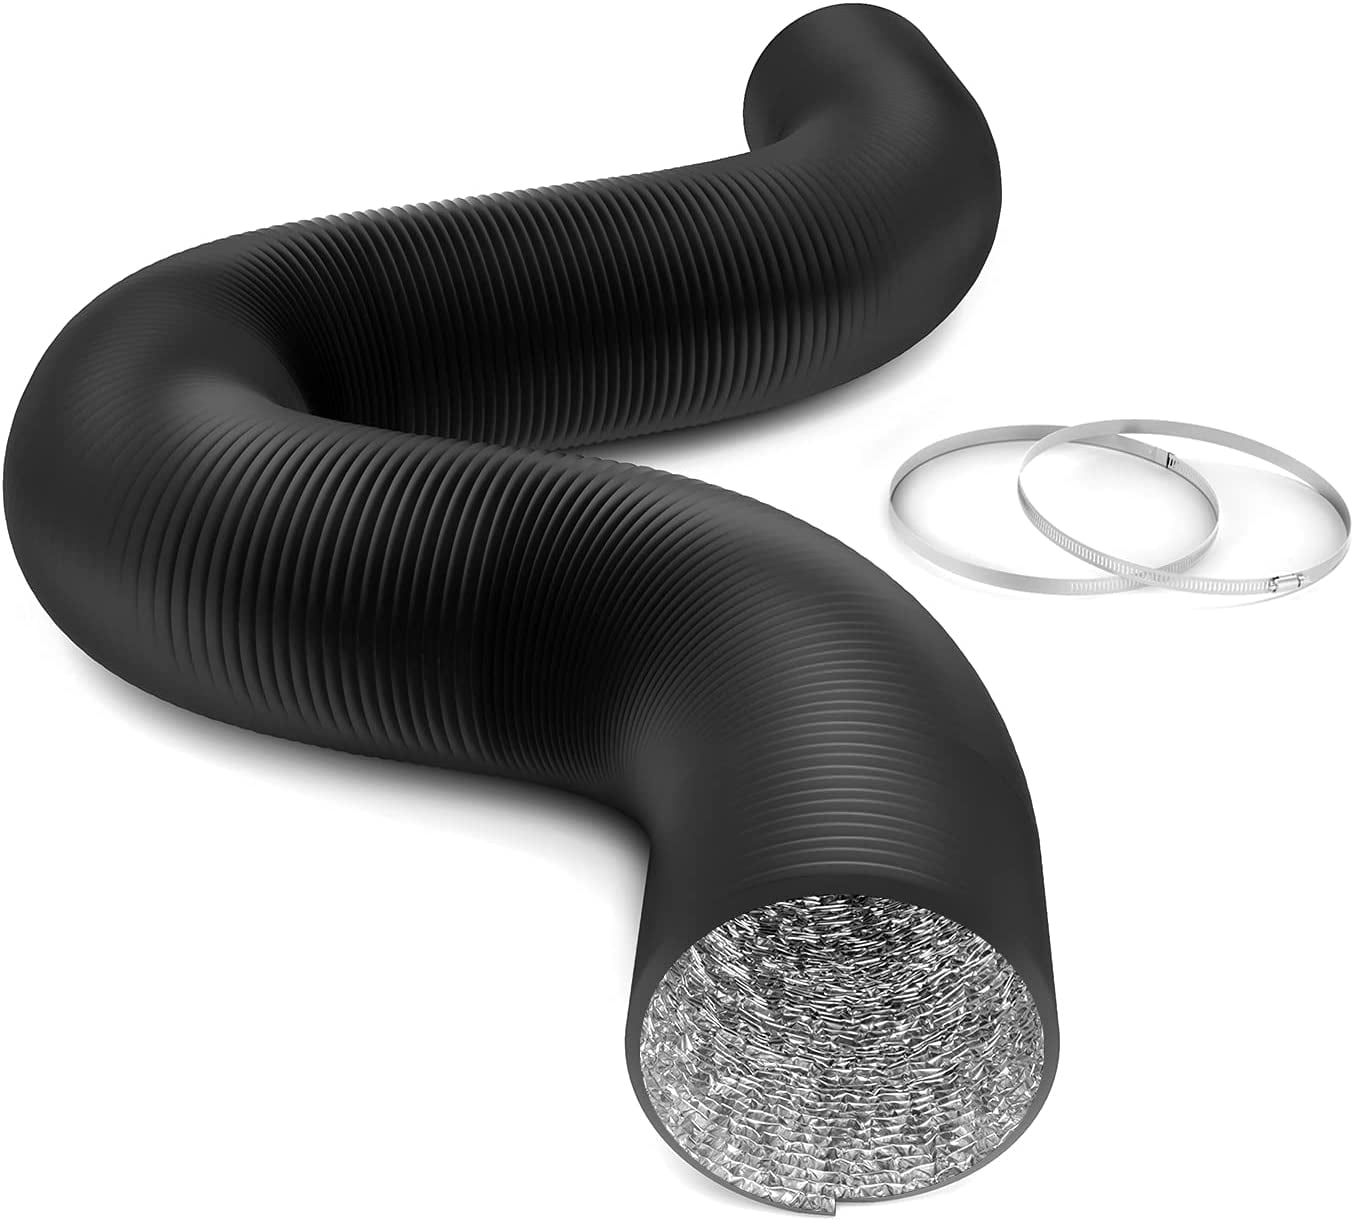 iPower Flexible 6 Inch 25 Feet Aluminum Ducting 4 Layer Protection Dryer  Vent Hose for HVAC Heating Cooling Ventilation and Exhaust, 2 Clamps  Included, PVC 6 in 25ft, Black 